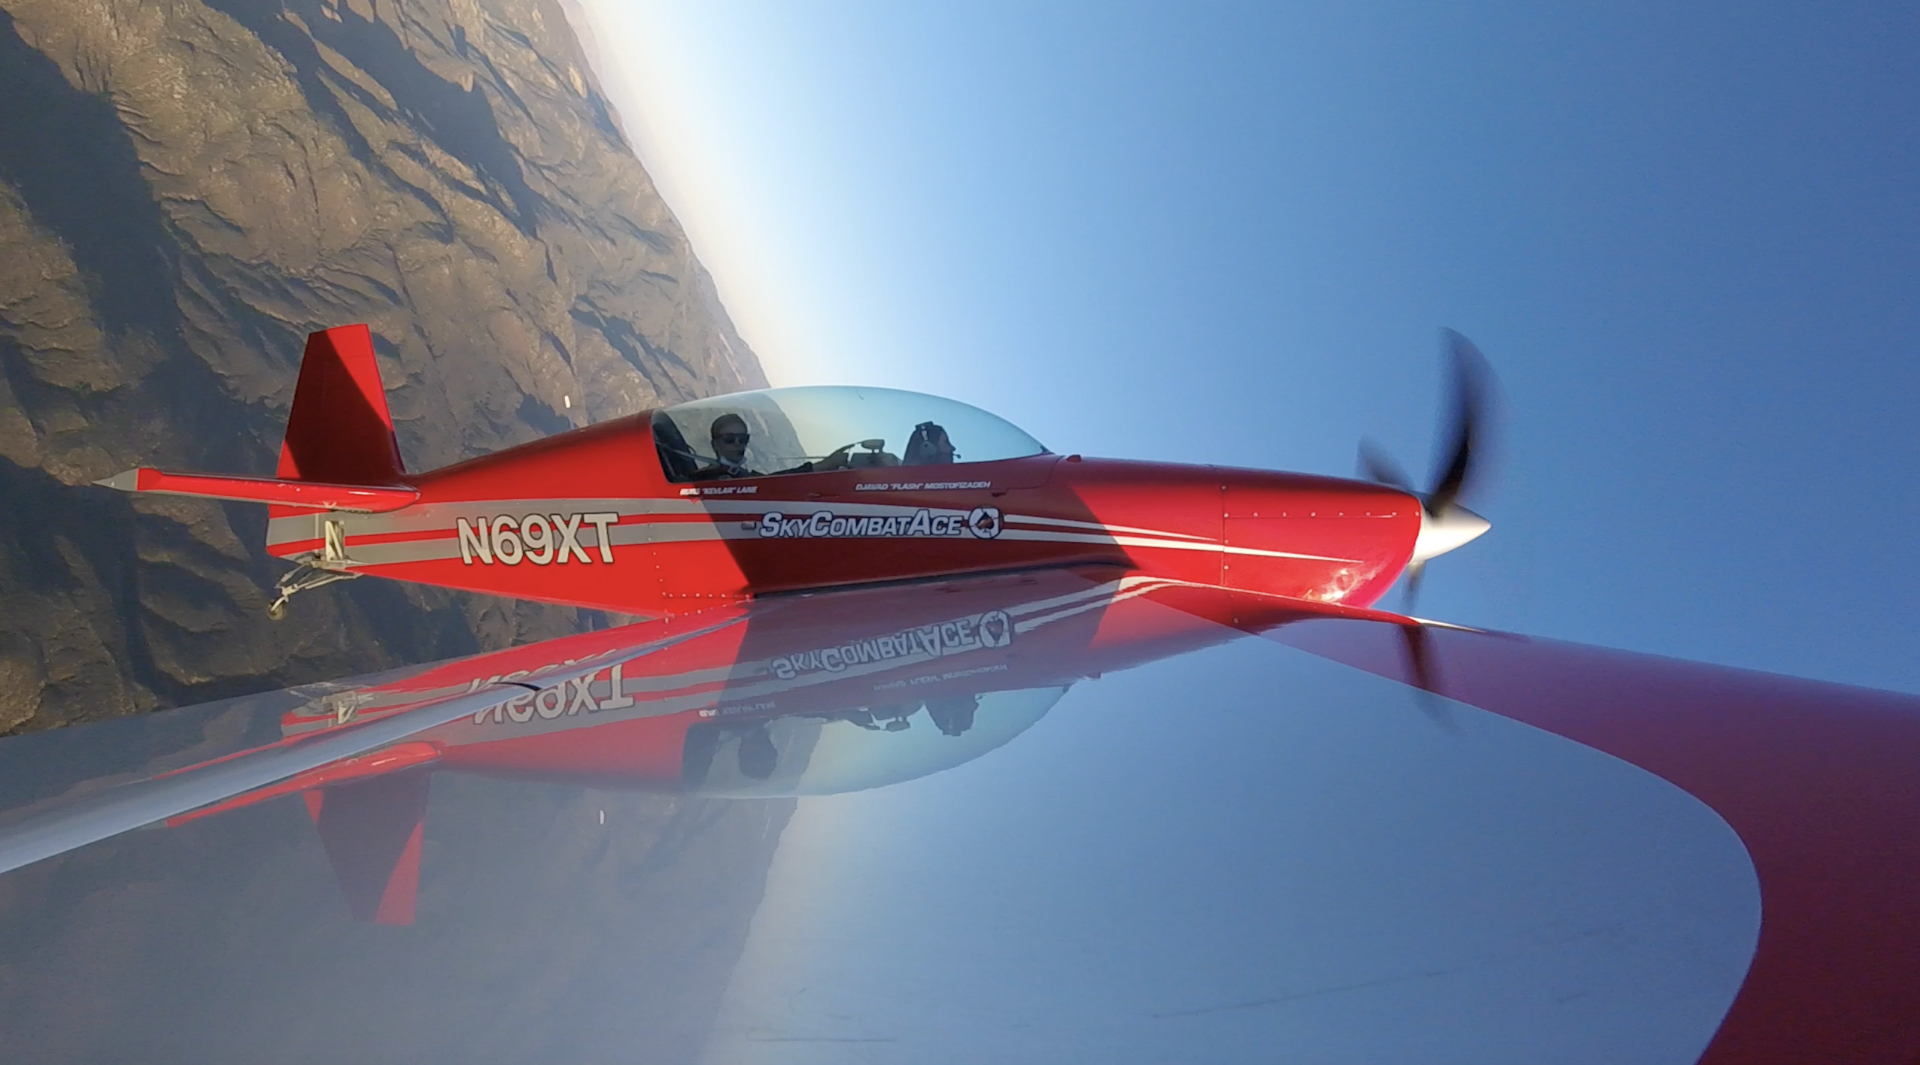 A view from the wing of a small red plane in the air